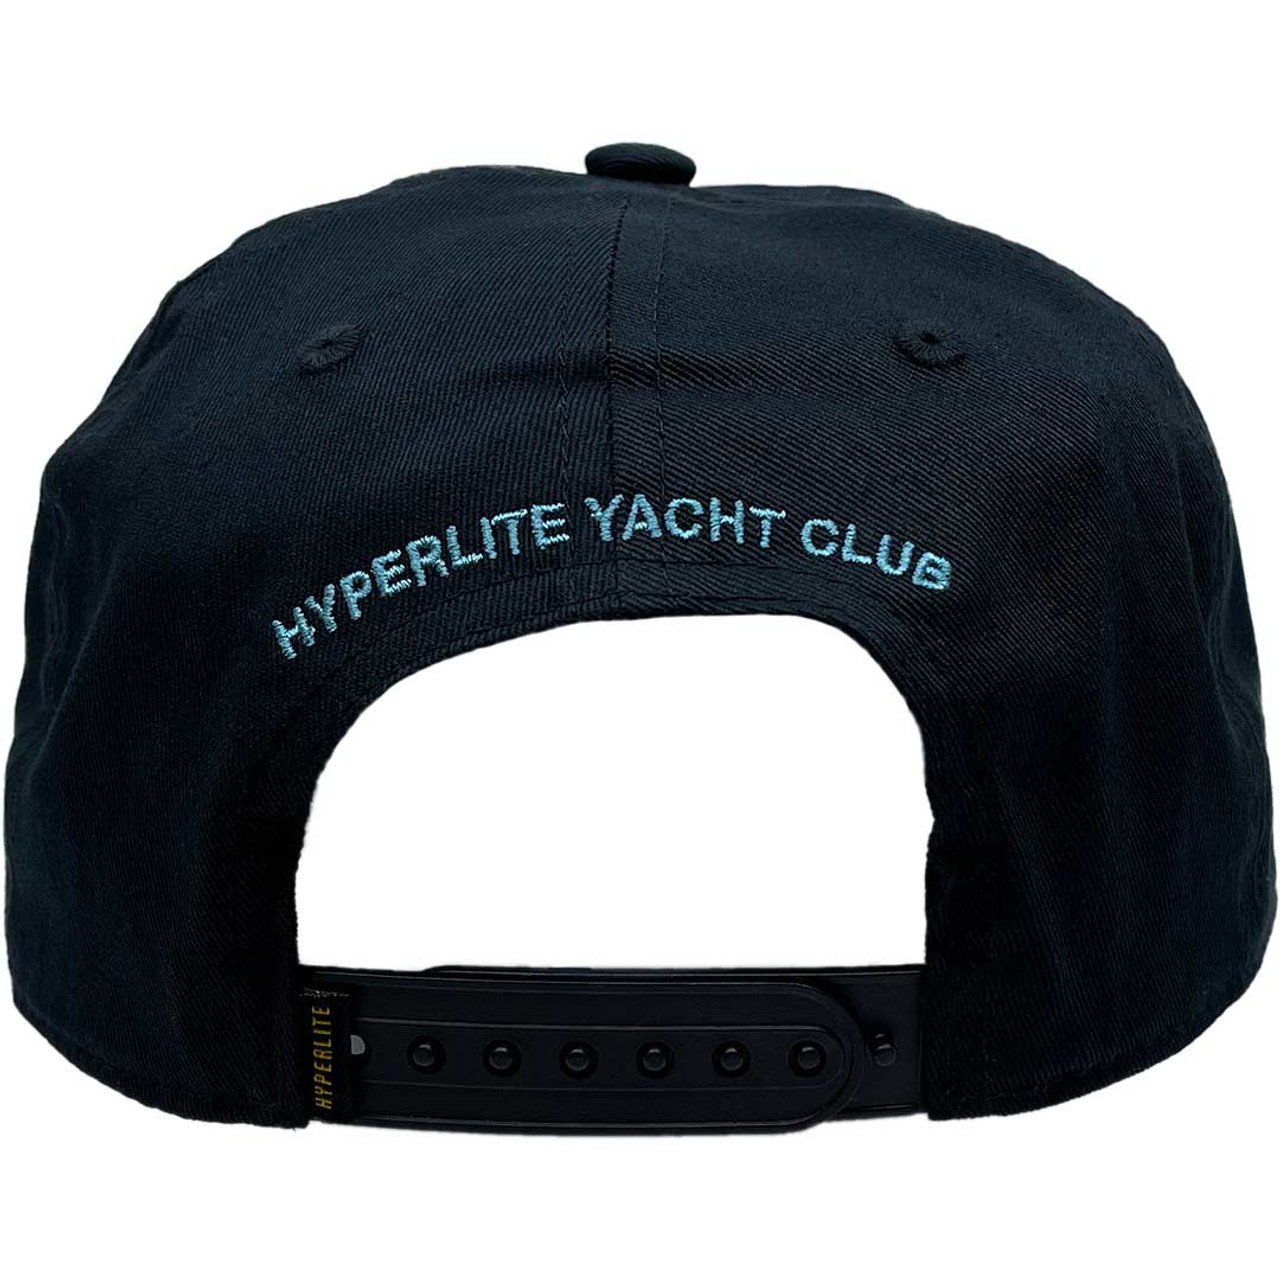 yacht club hat for sale